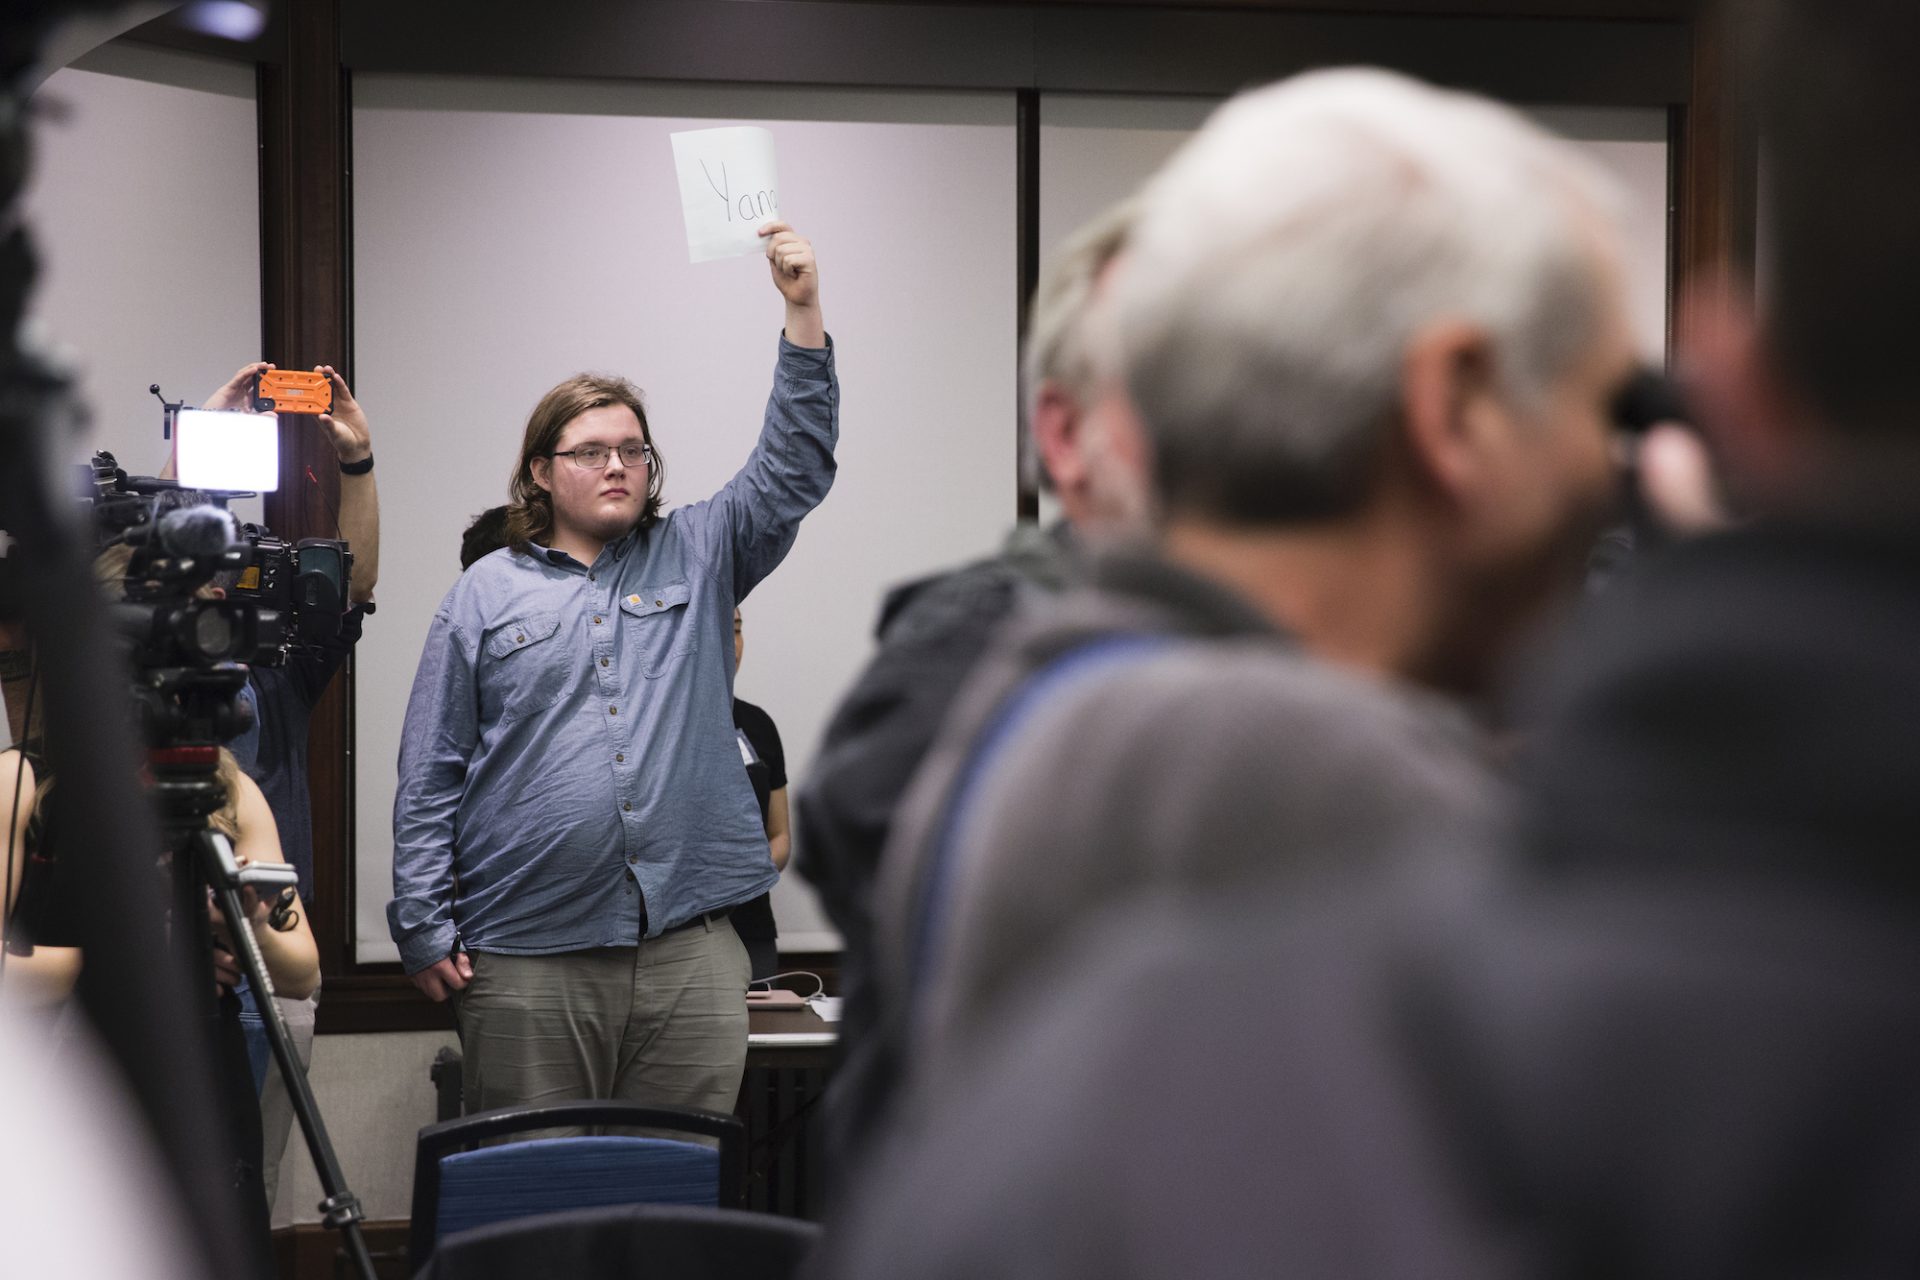 Samuel Pederson, 19, a student at the University of Pennsylvania, petitions for Andrew Yang at Penn's satellite Iowa caucus on February 3, 2020. Pederson ultimately cast his vote for Bernie Sanders after Yang could not achieve viability.